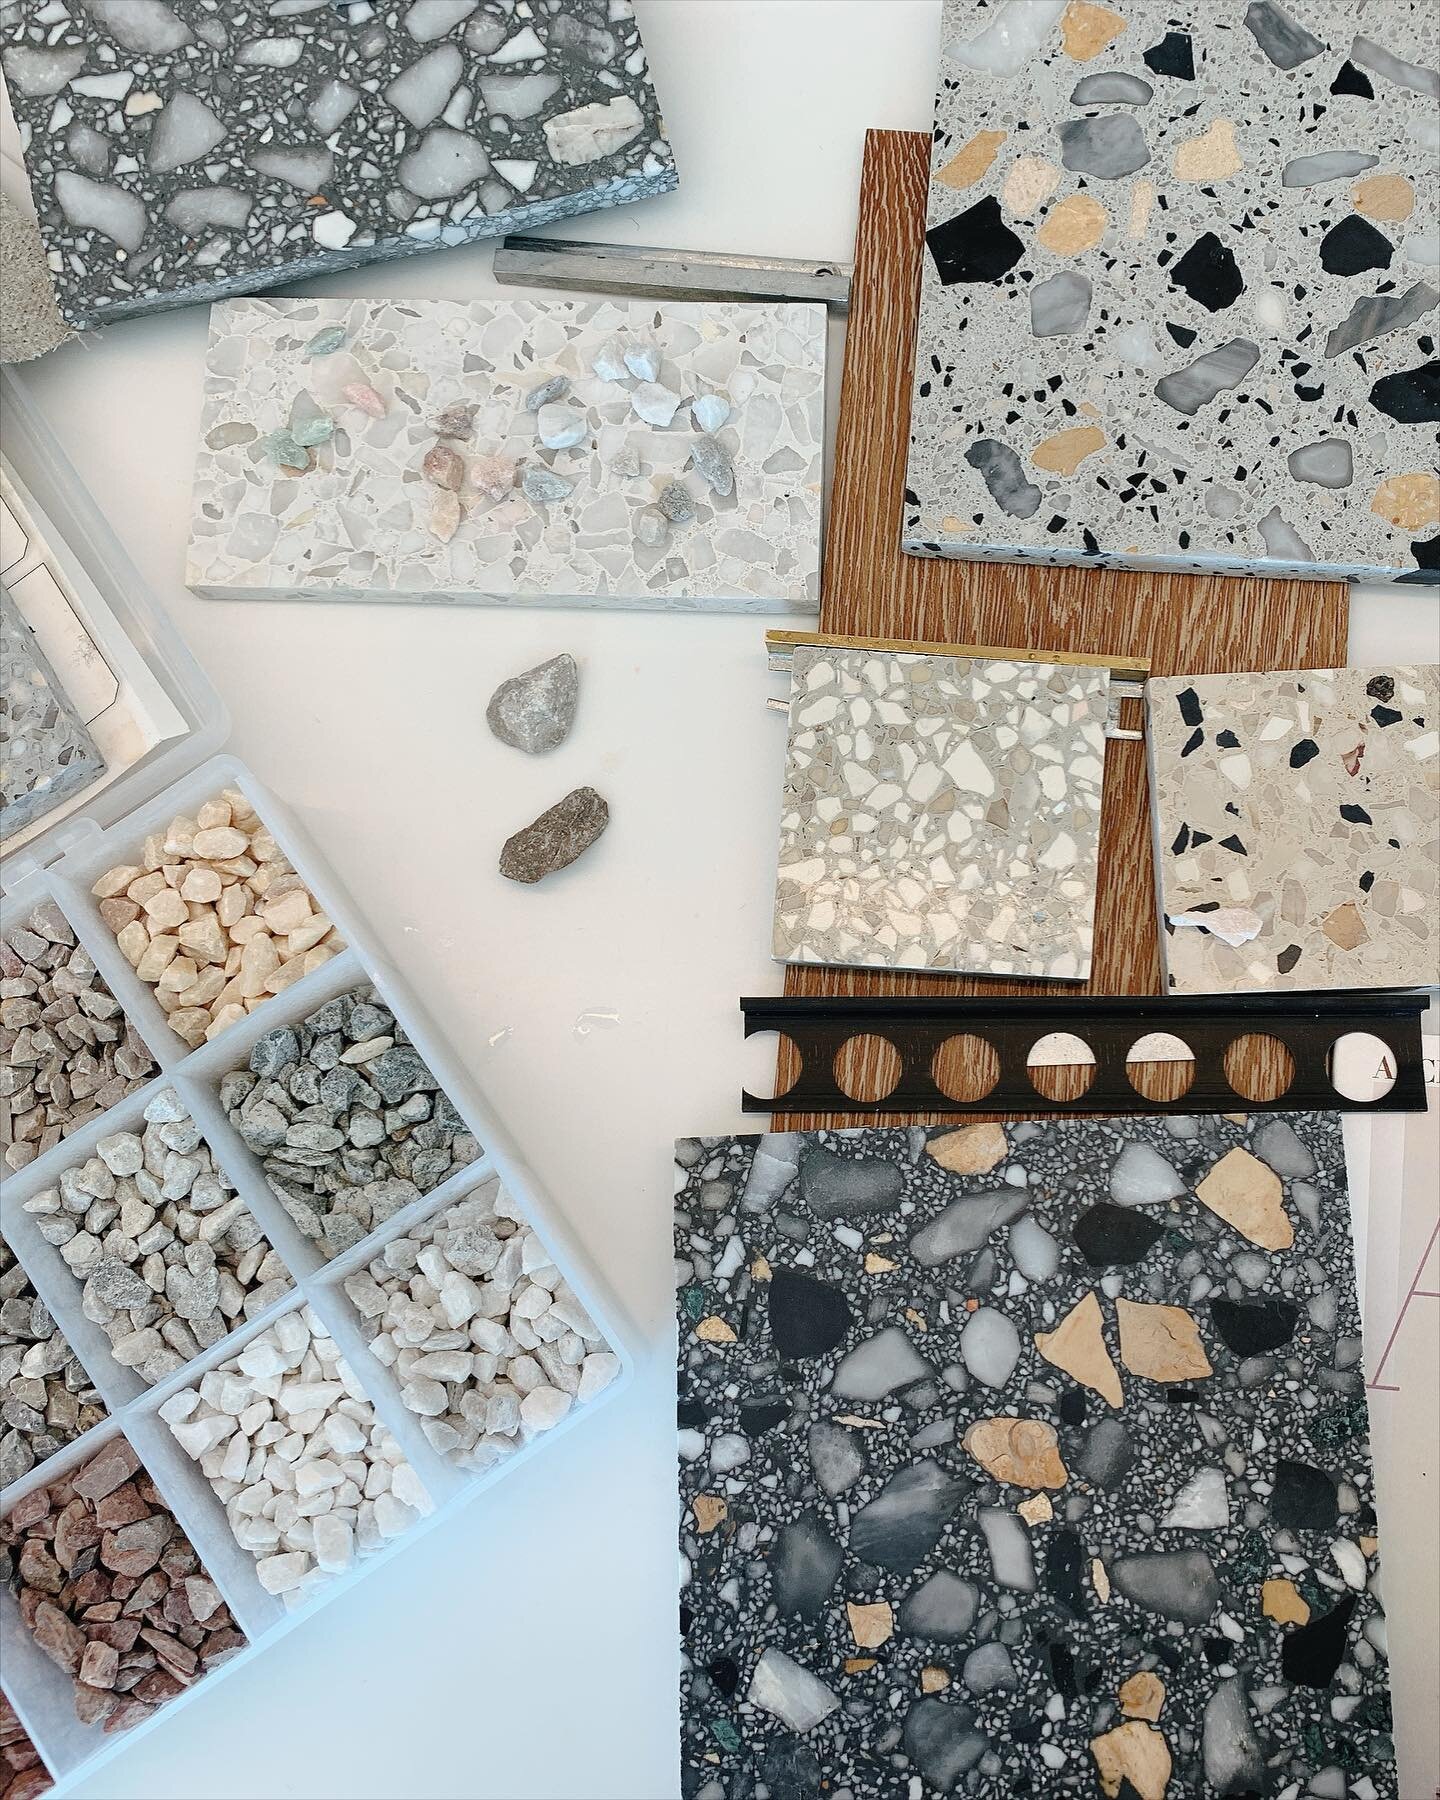 We love a custom terrazzo floor! Creating custom samples for a project today! 
.
.
.
#terrazzo has made a comeback lately.. seeing a lot of super scaled terrazzo back splashes and flooring &mdash; so exciting! How do you feel about Terrazzo!?
.
.
.

